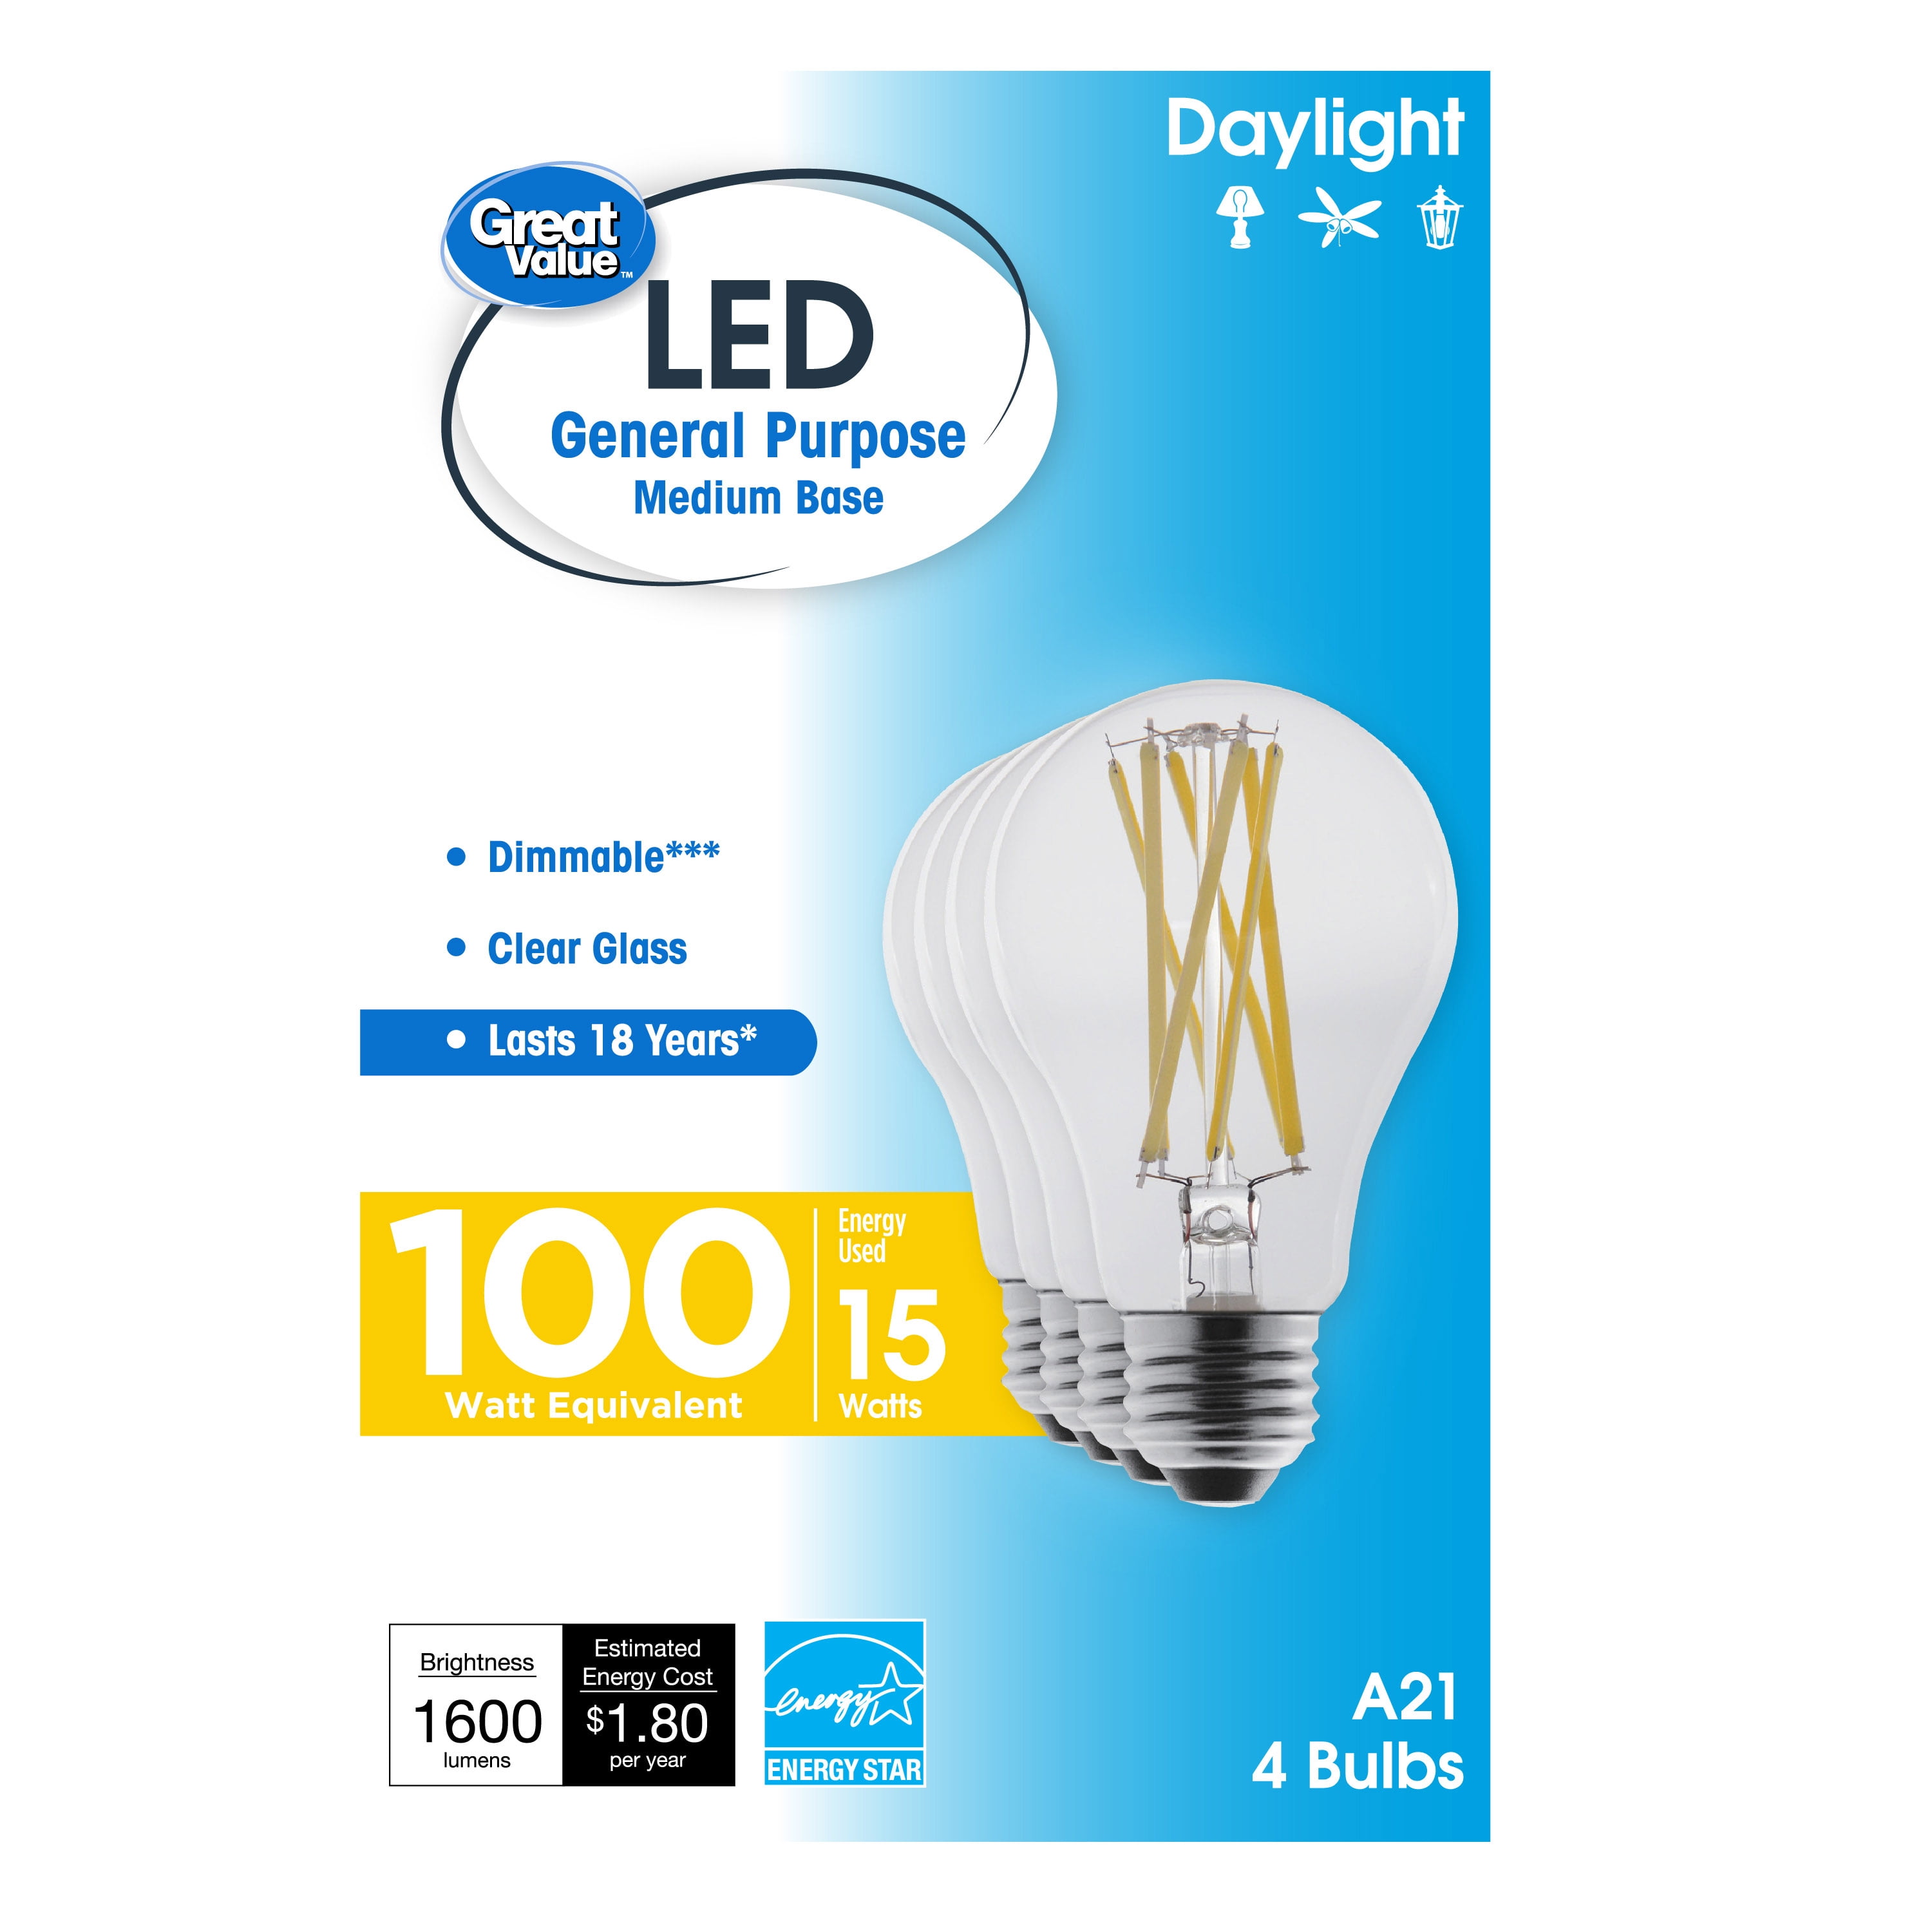 Great Value 18 Year LED Light Bulbs, A21 100 Watts Equivalent, 15 Watts Efficient, Daylight, Clear Glass, 4 Pack Walmart.com